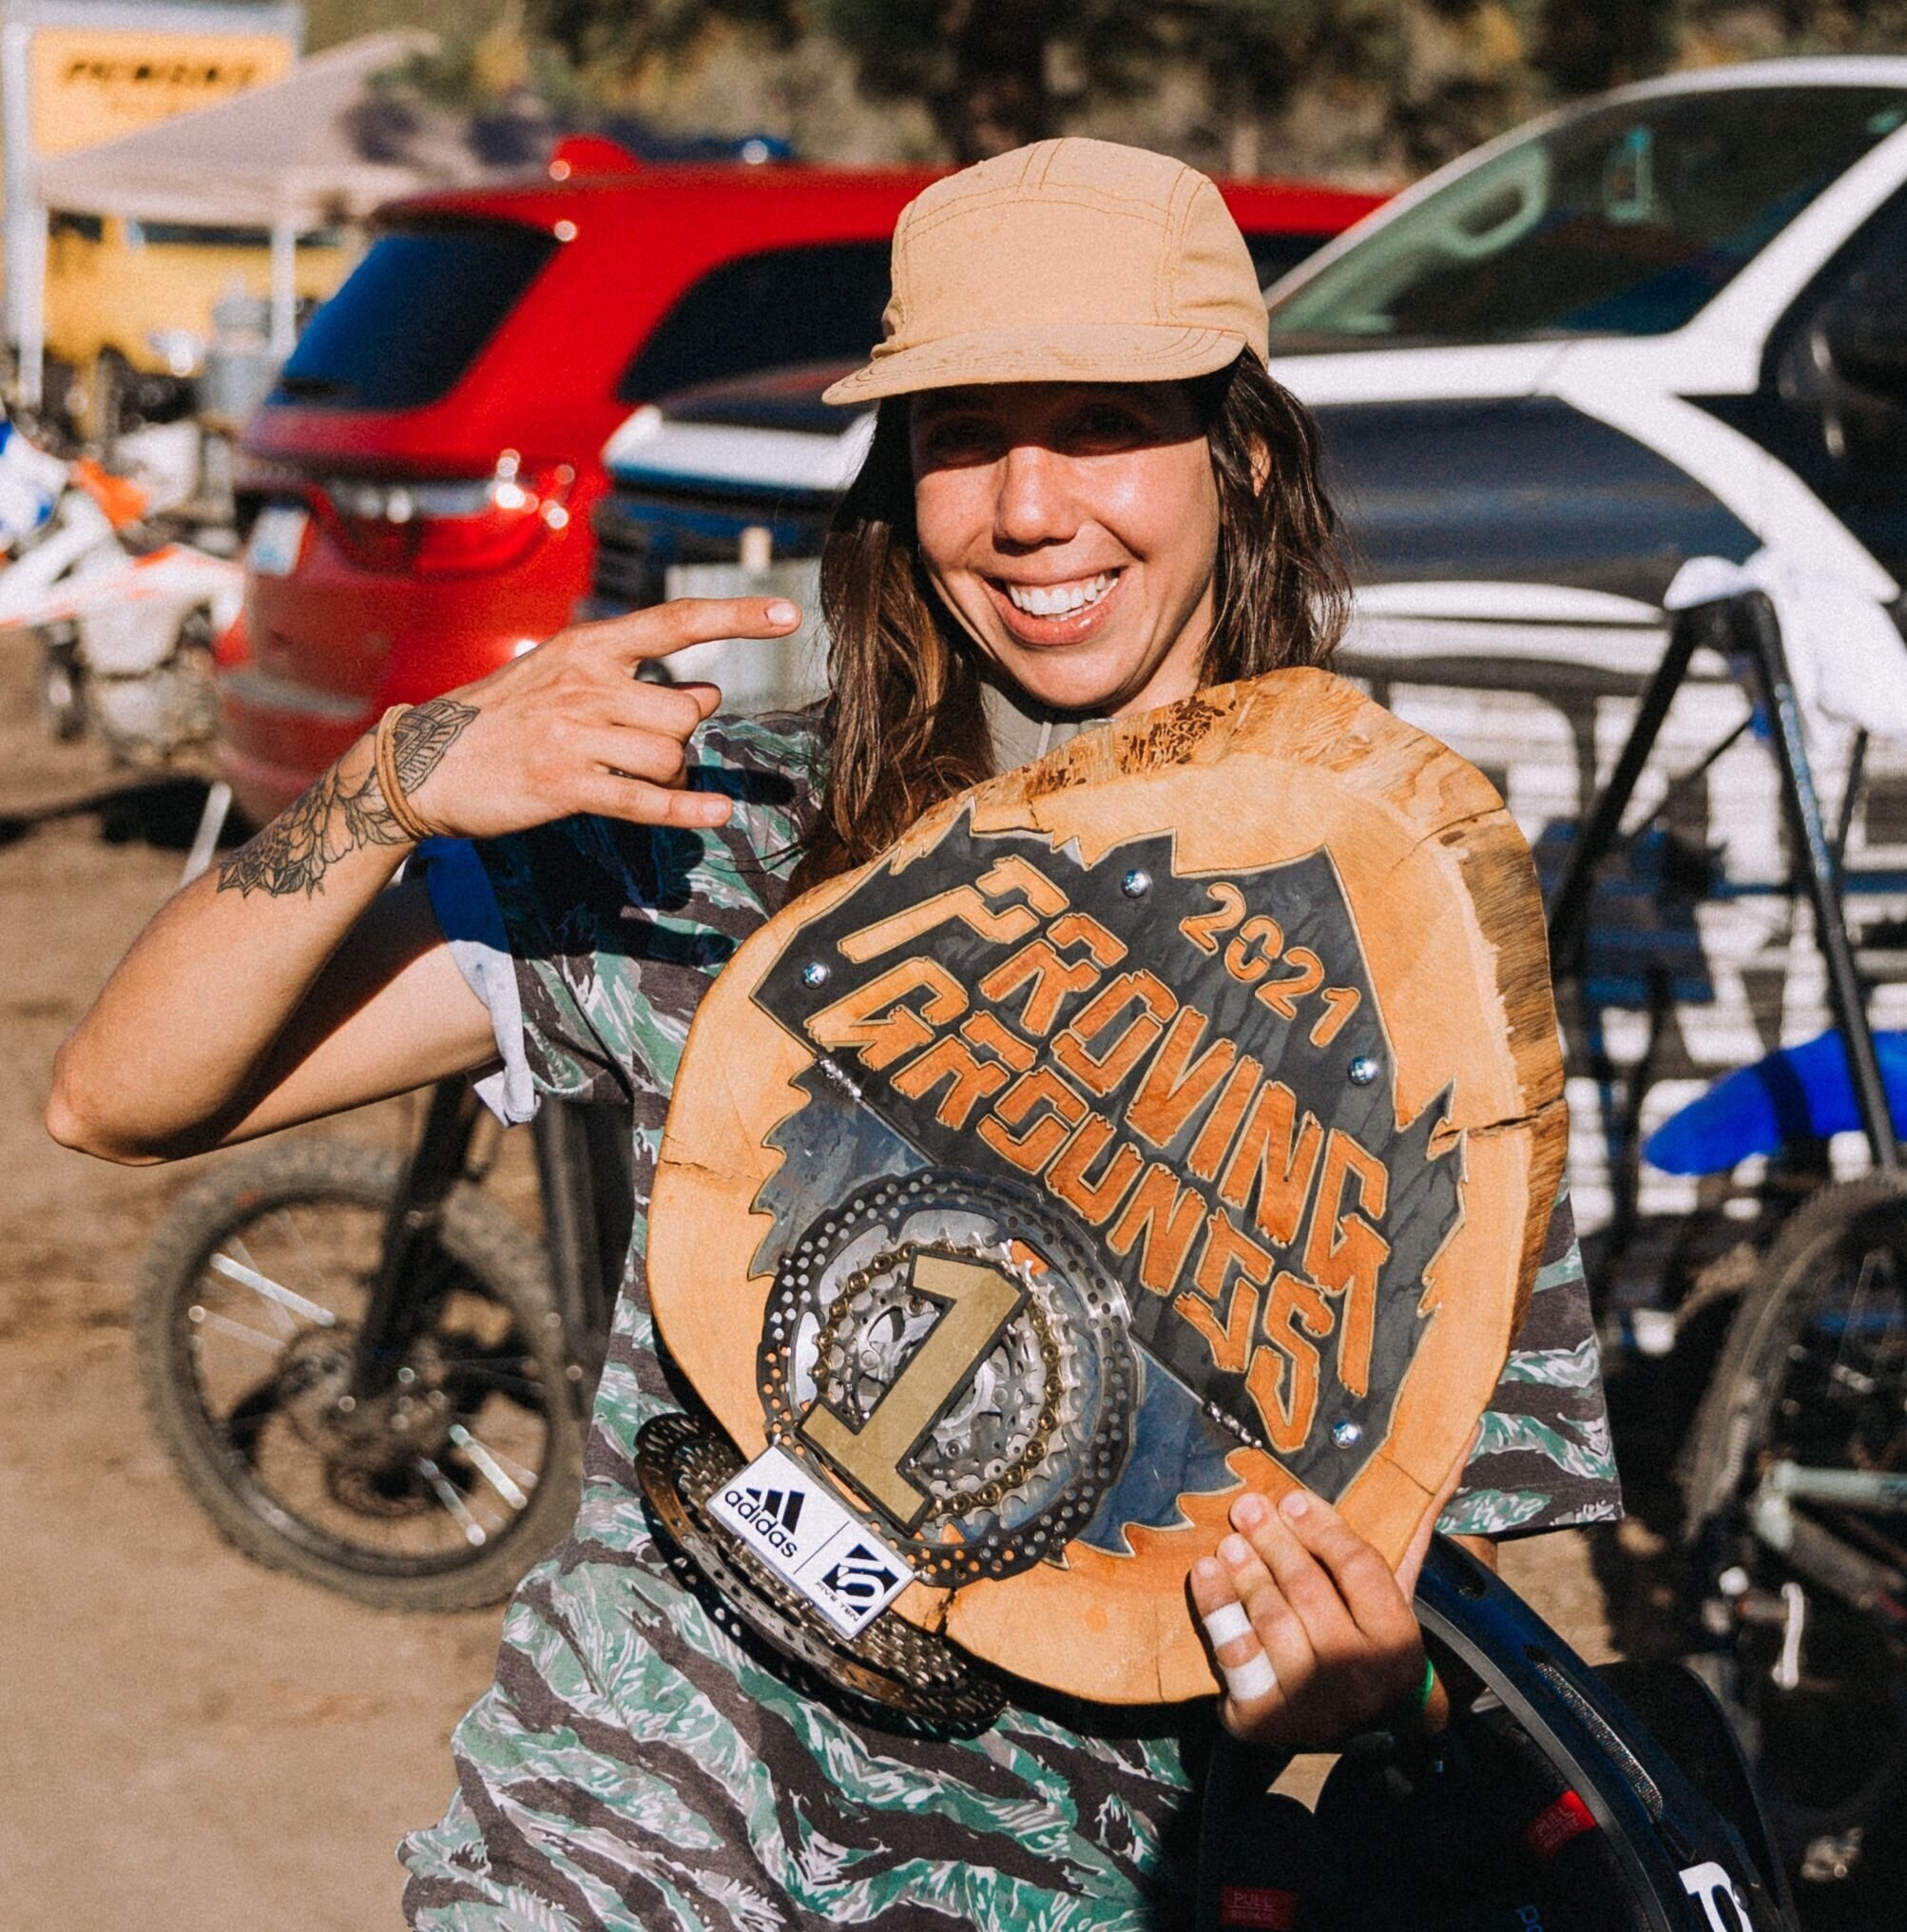 Cami Nogueira wins Proving Grounds first ever women's pro category